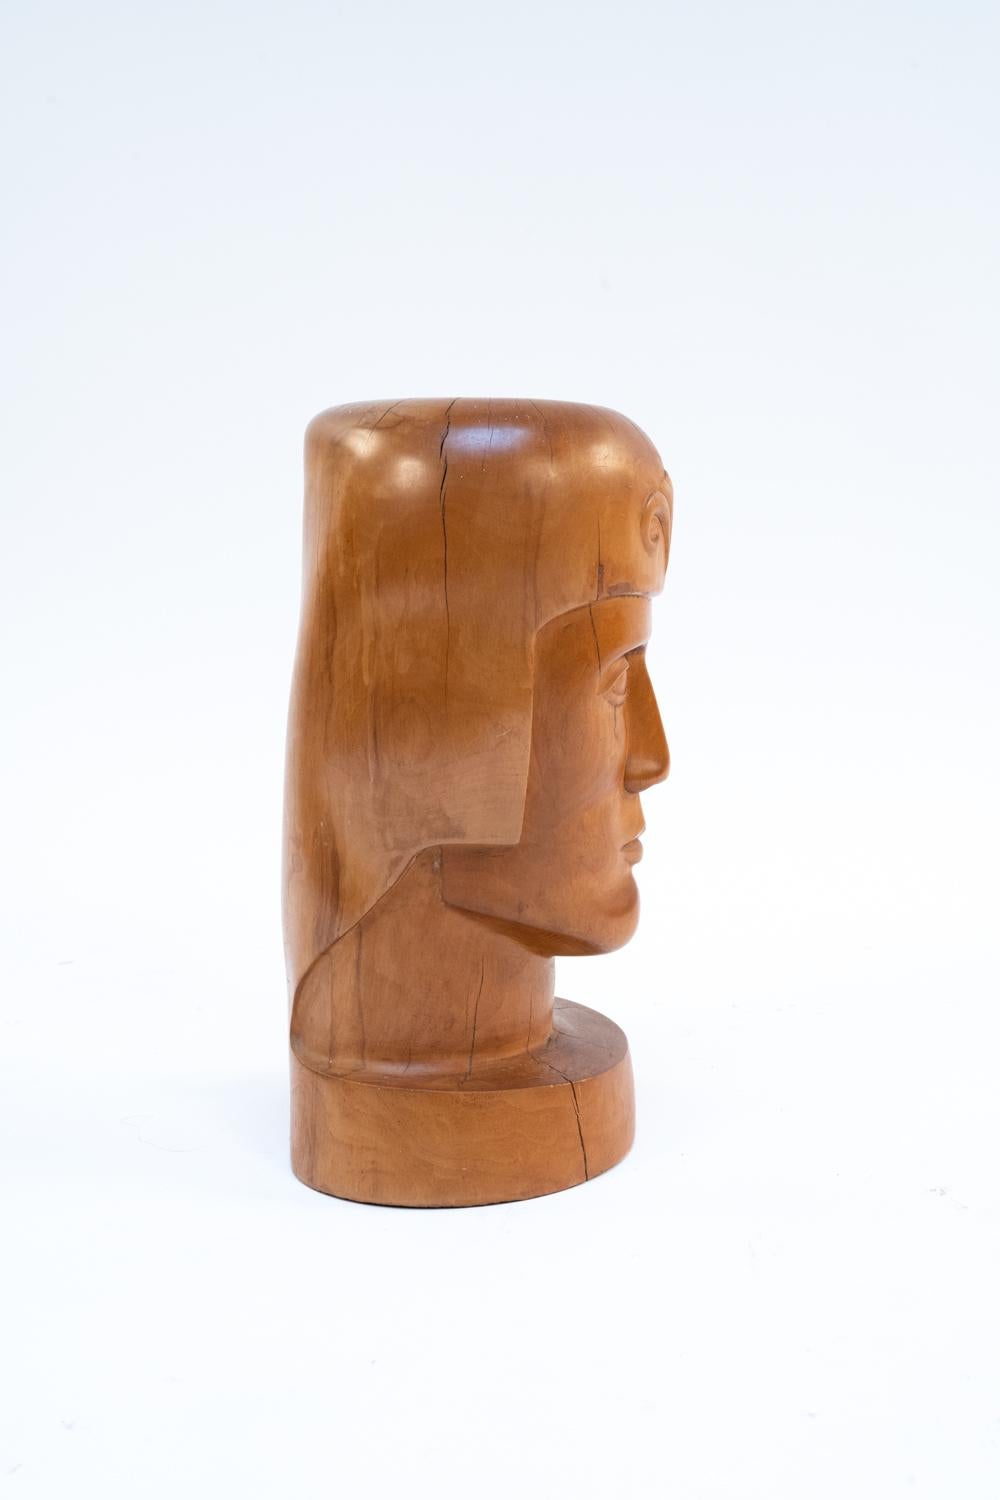 20th Century Modernist Carved Wooden Head, Man with Helmet For Sale